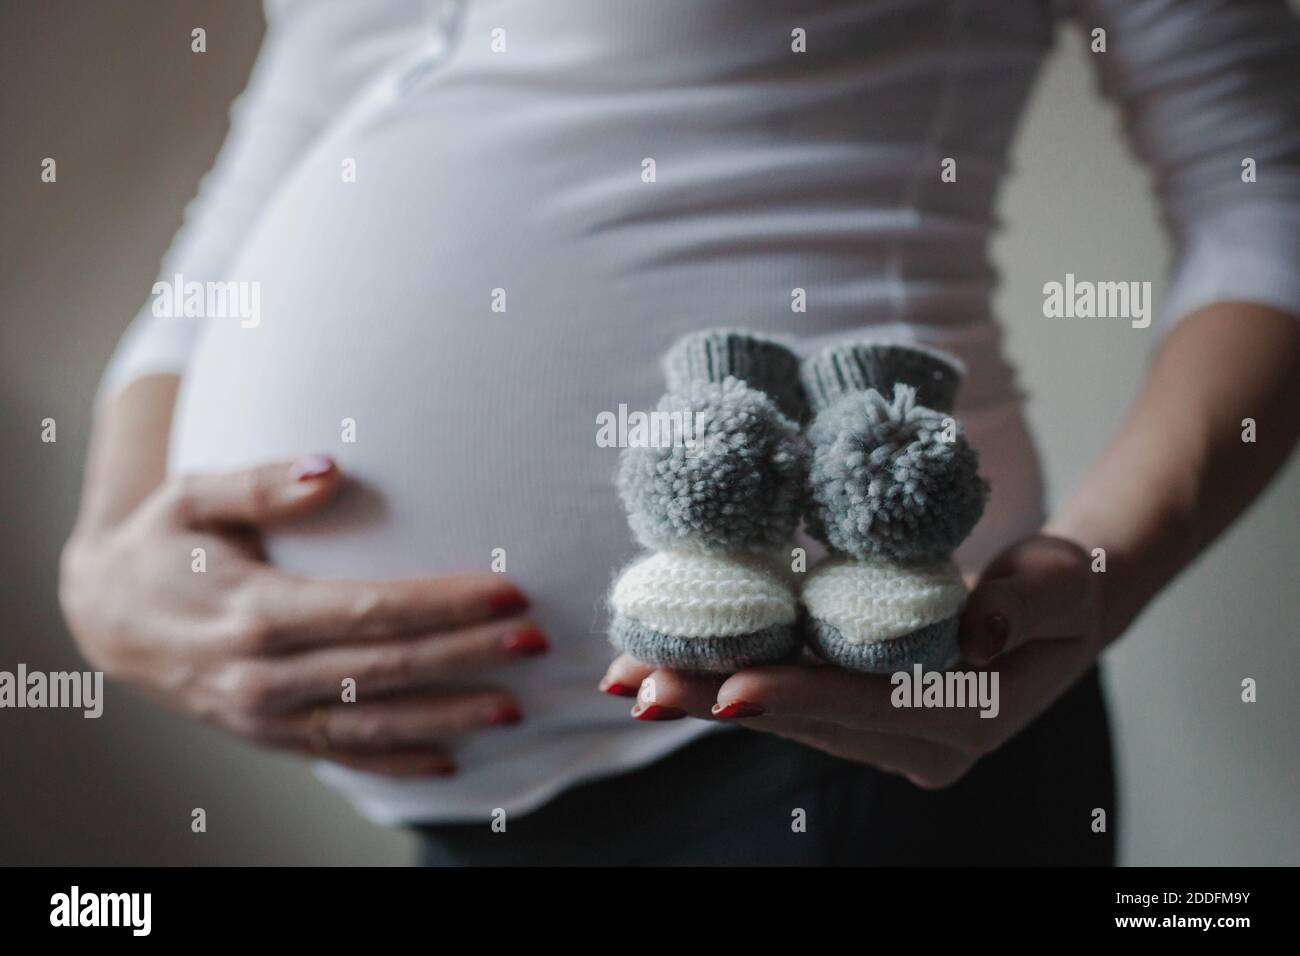 Closeup of a pregnant woman holding knitted baby socks. Coming soon concept. Expecting mother in the last trimester. Stock Photo